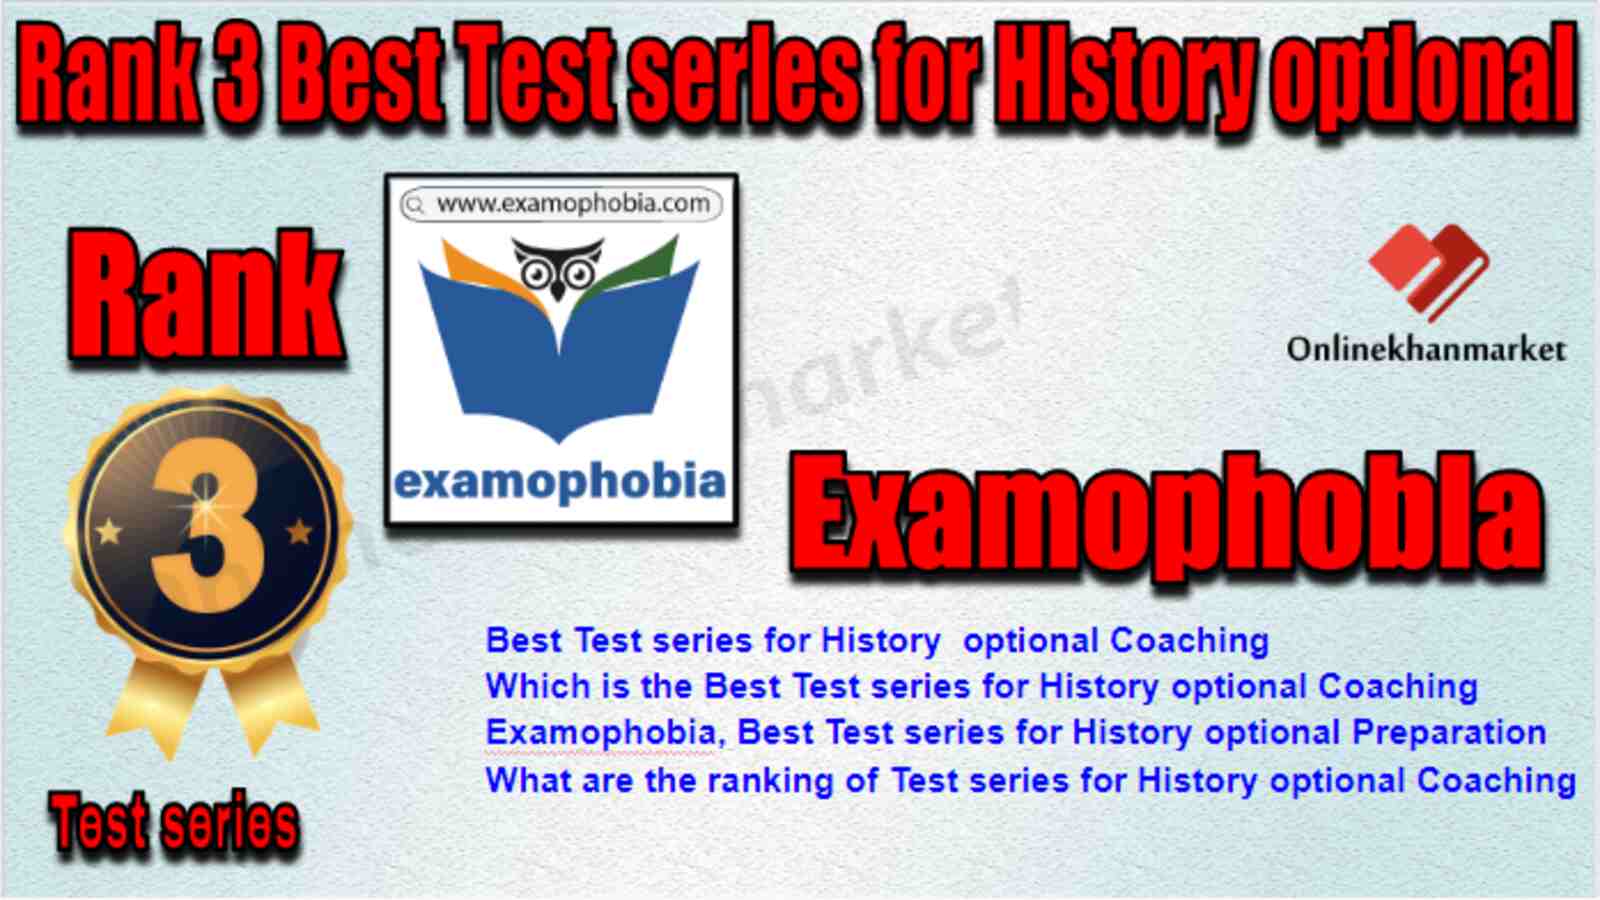 Rank 3 Best Test series for History optional